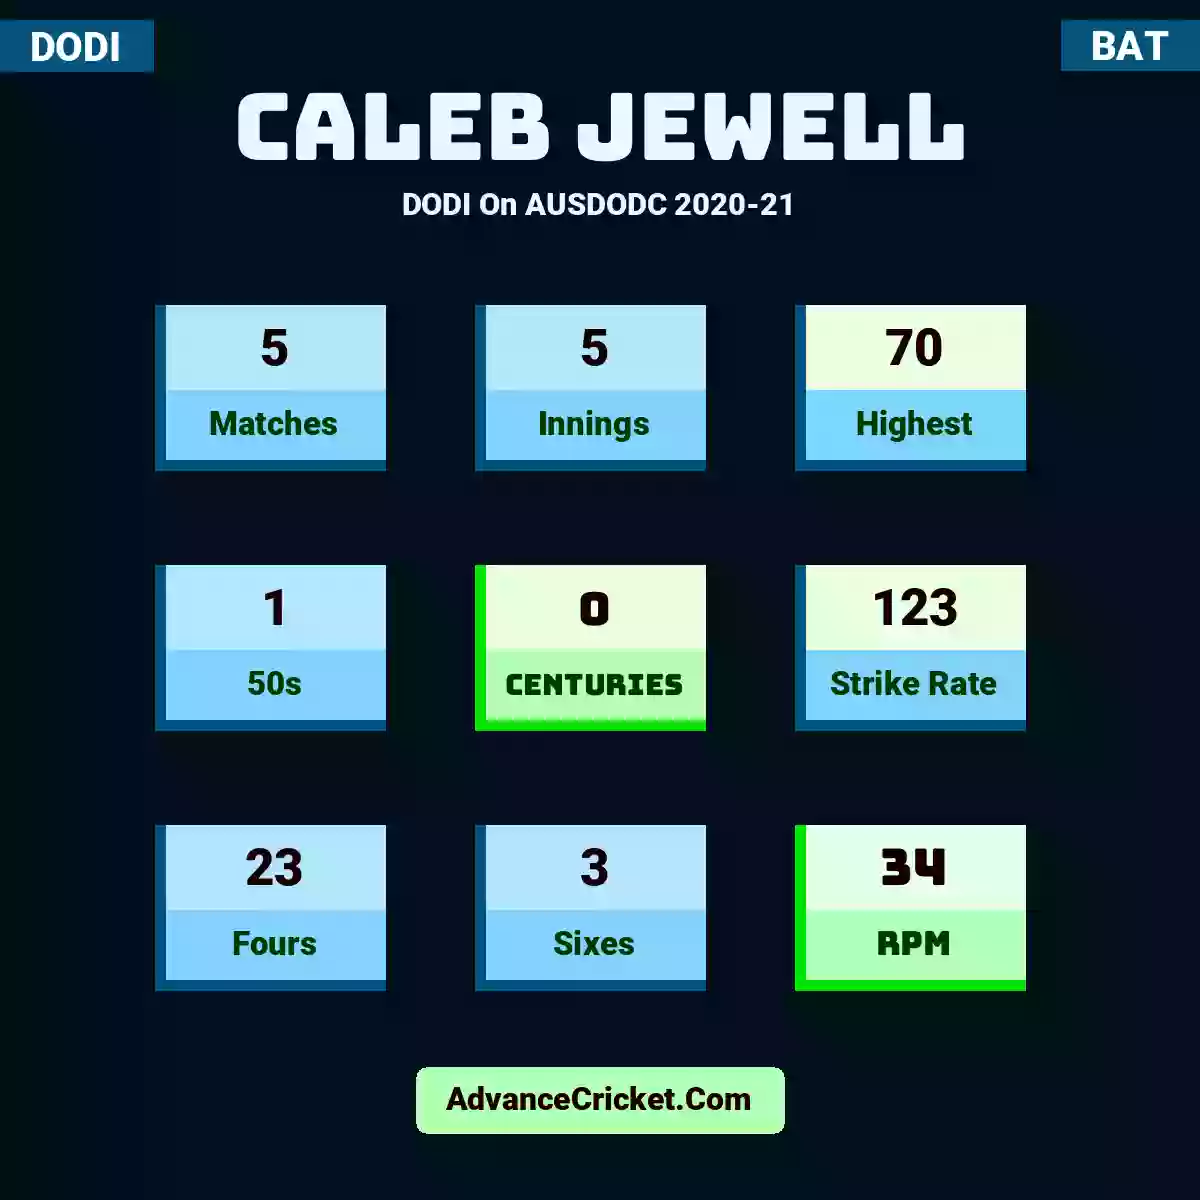 Caleb Jewell DODI  On AUSDODC 2020-21, Caleb Jewell played 5 matches, scored 70 runs as highest, 1 half-centuries, and 0 centuries, with a strike rate of 123. C.Jewell hit 23 fours and 3 sixes, with an RPM of 34.